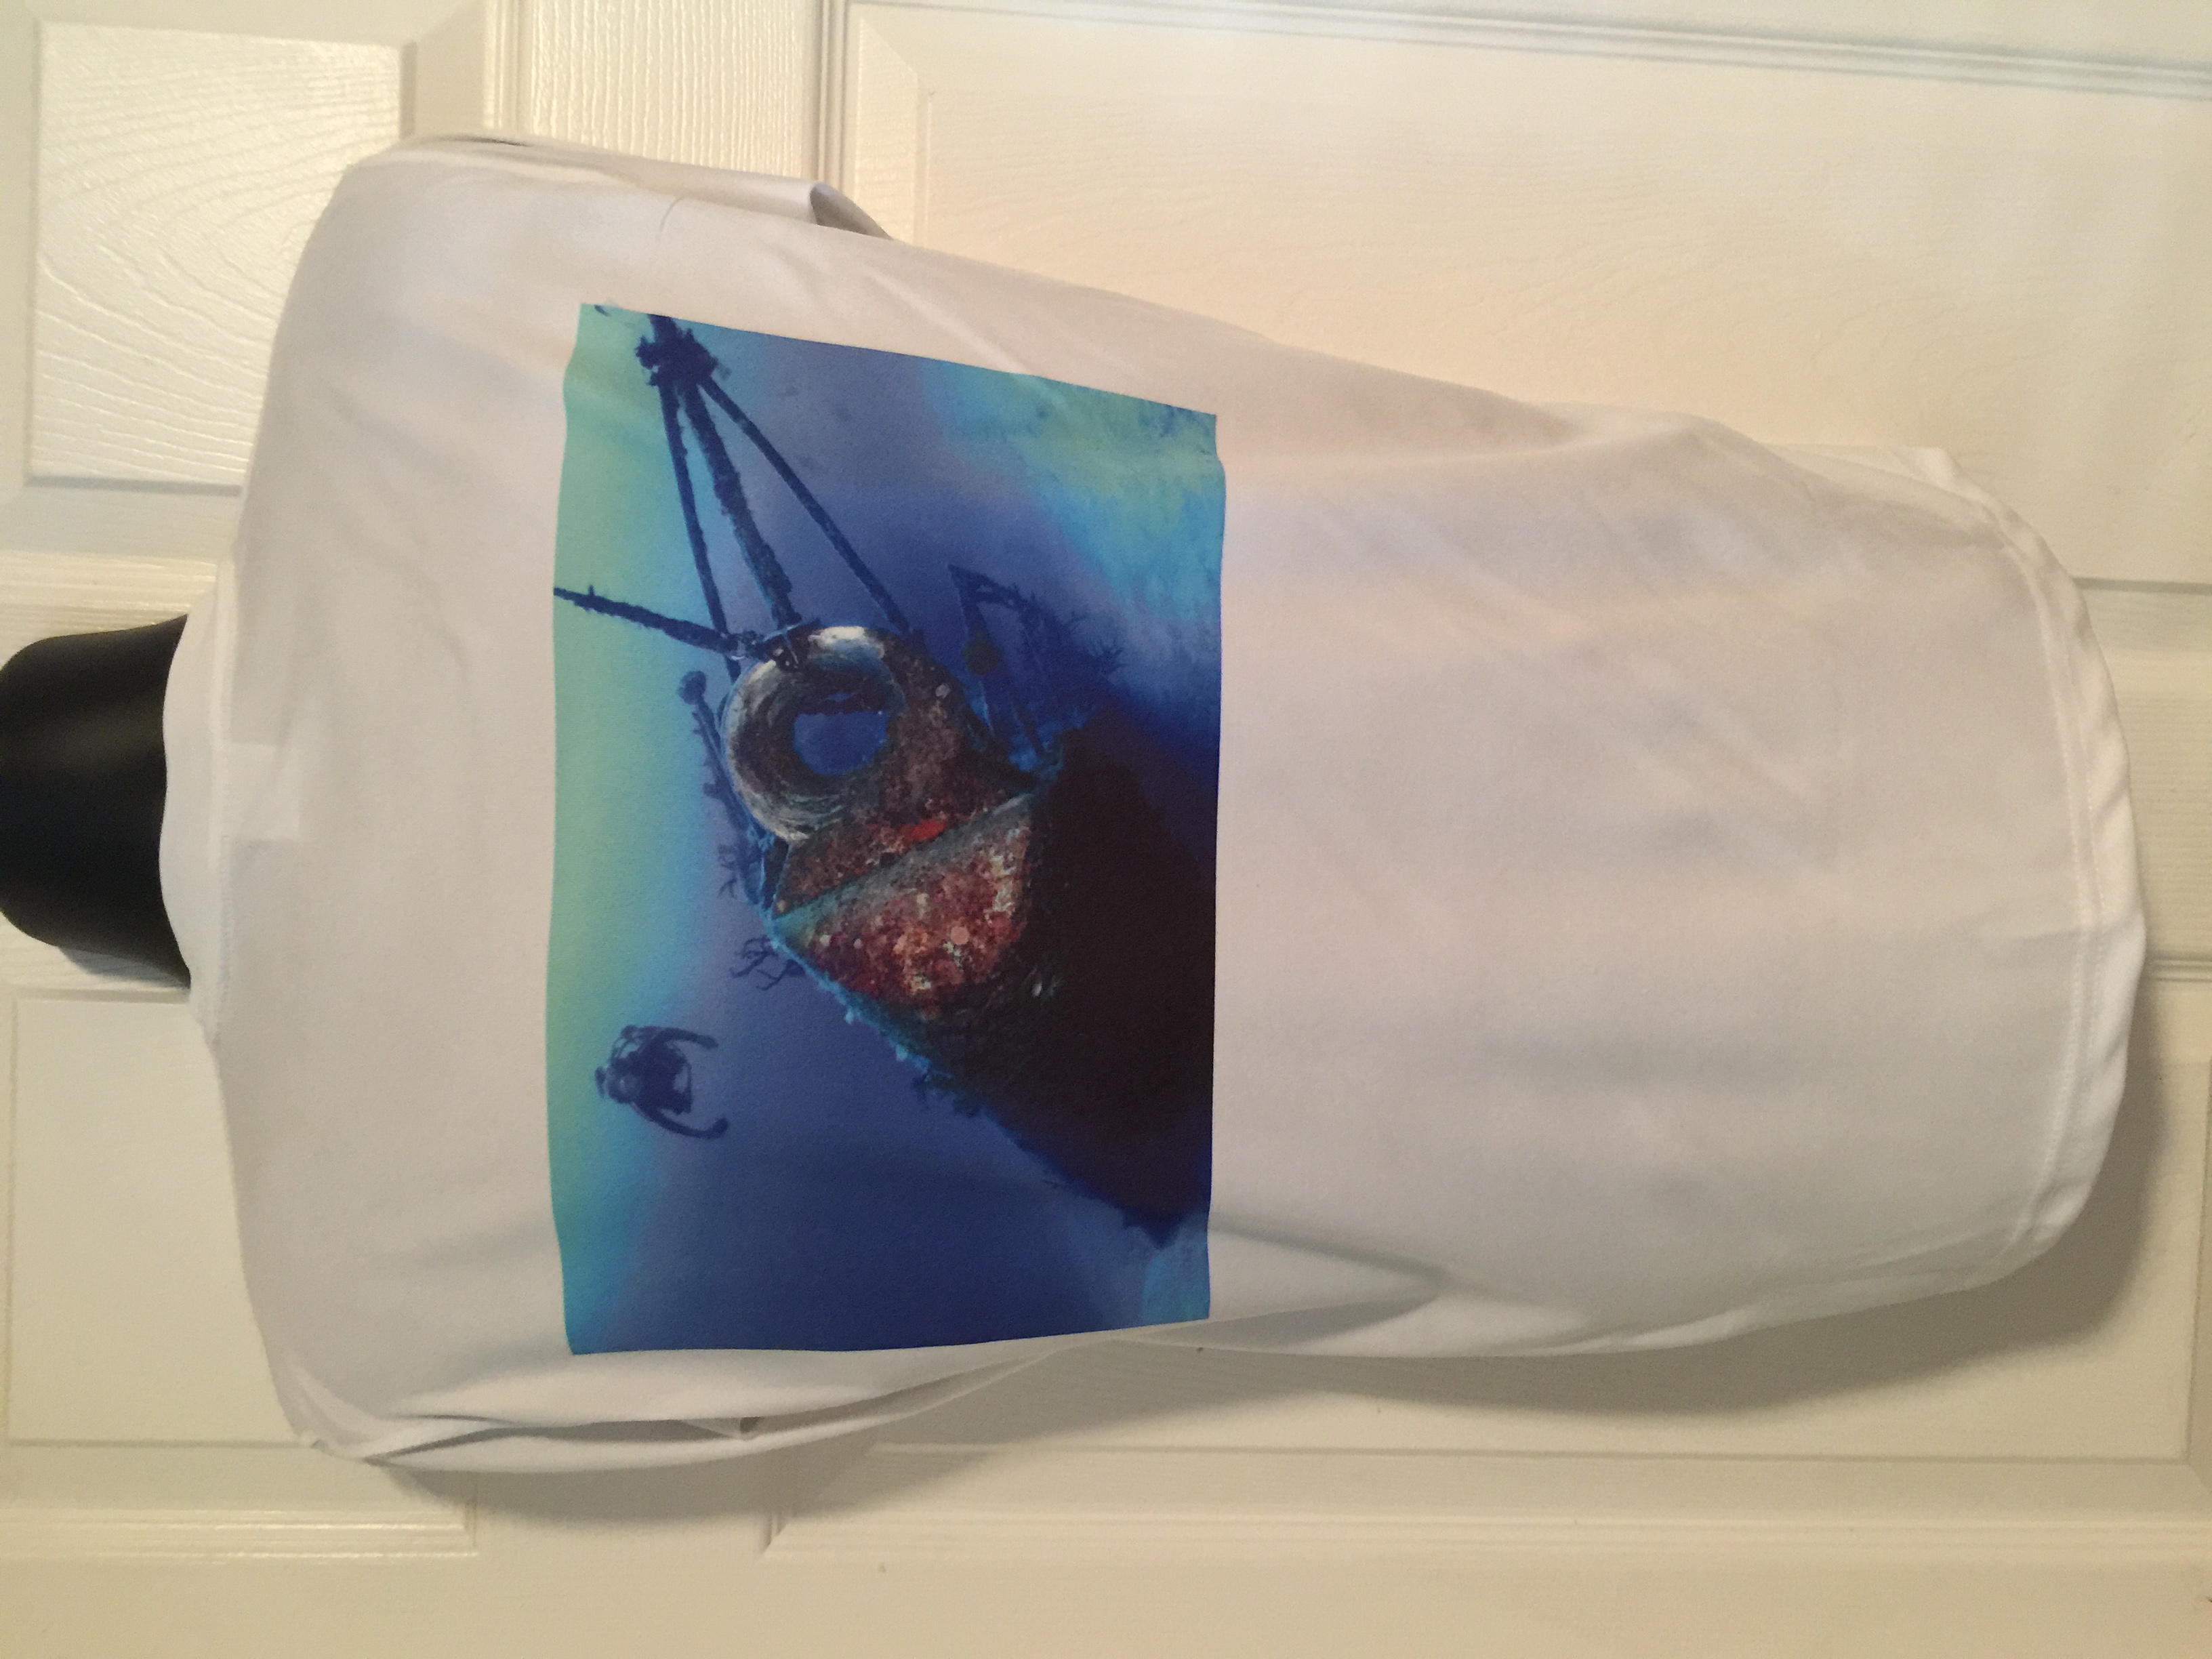 Wreck Diver made with sublimation printing